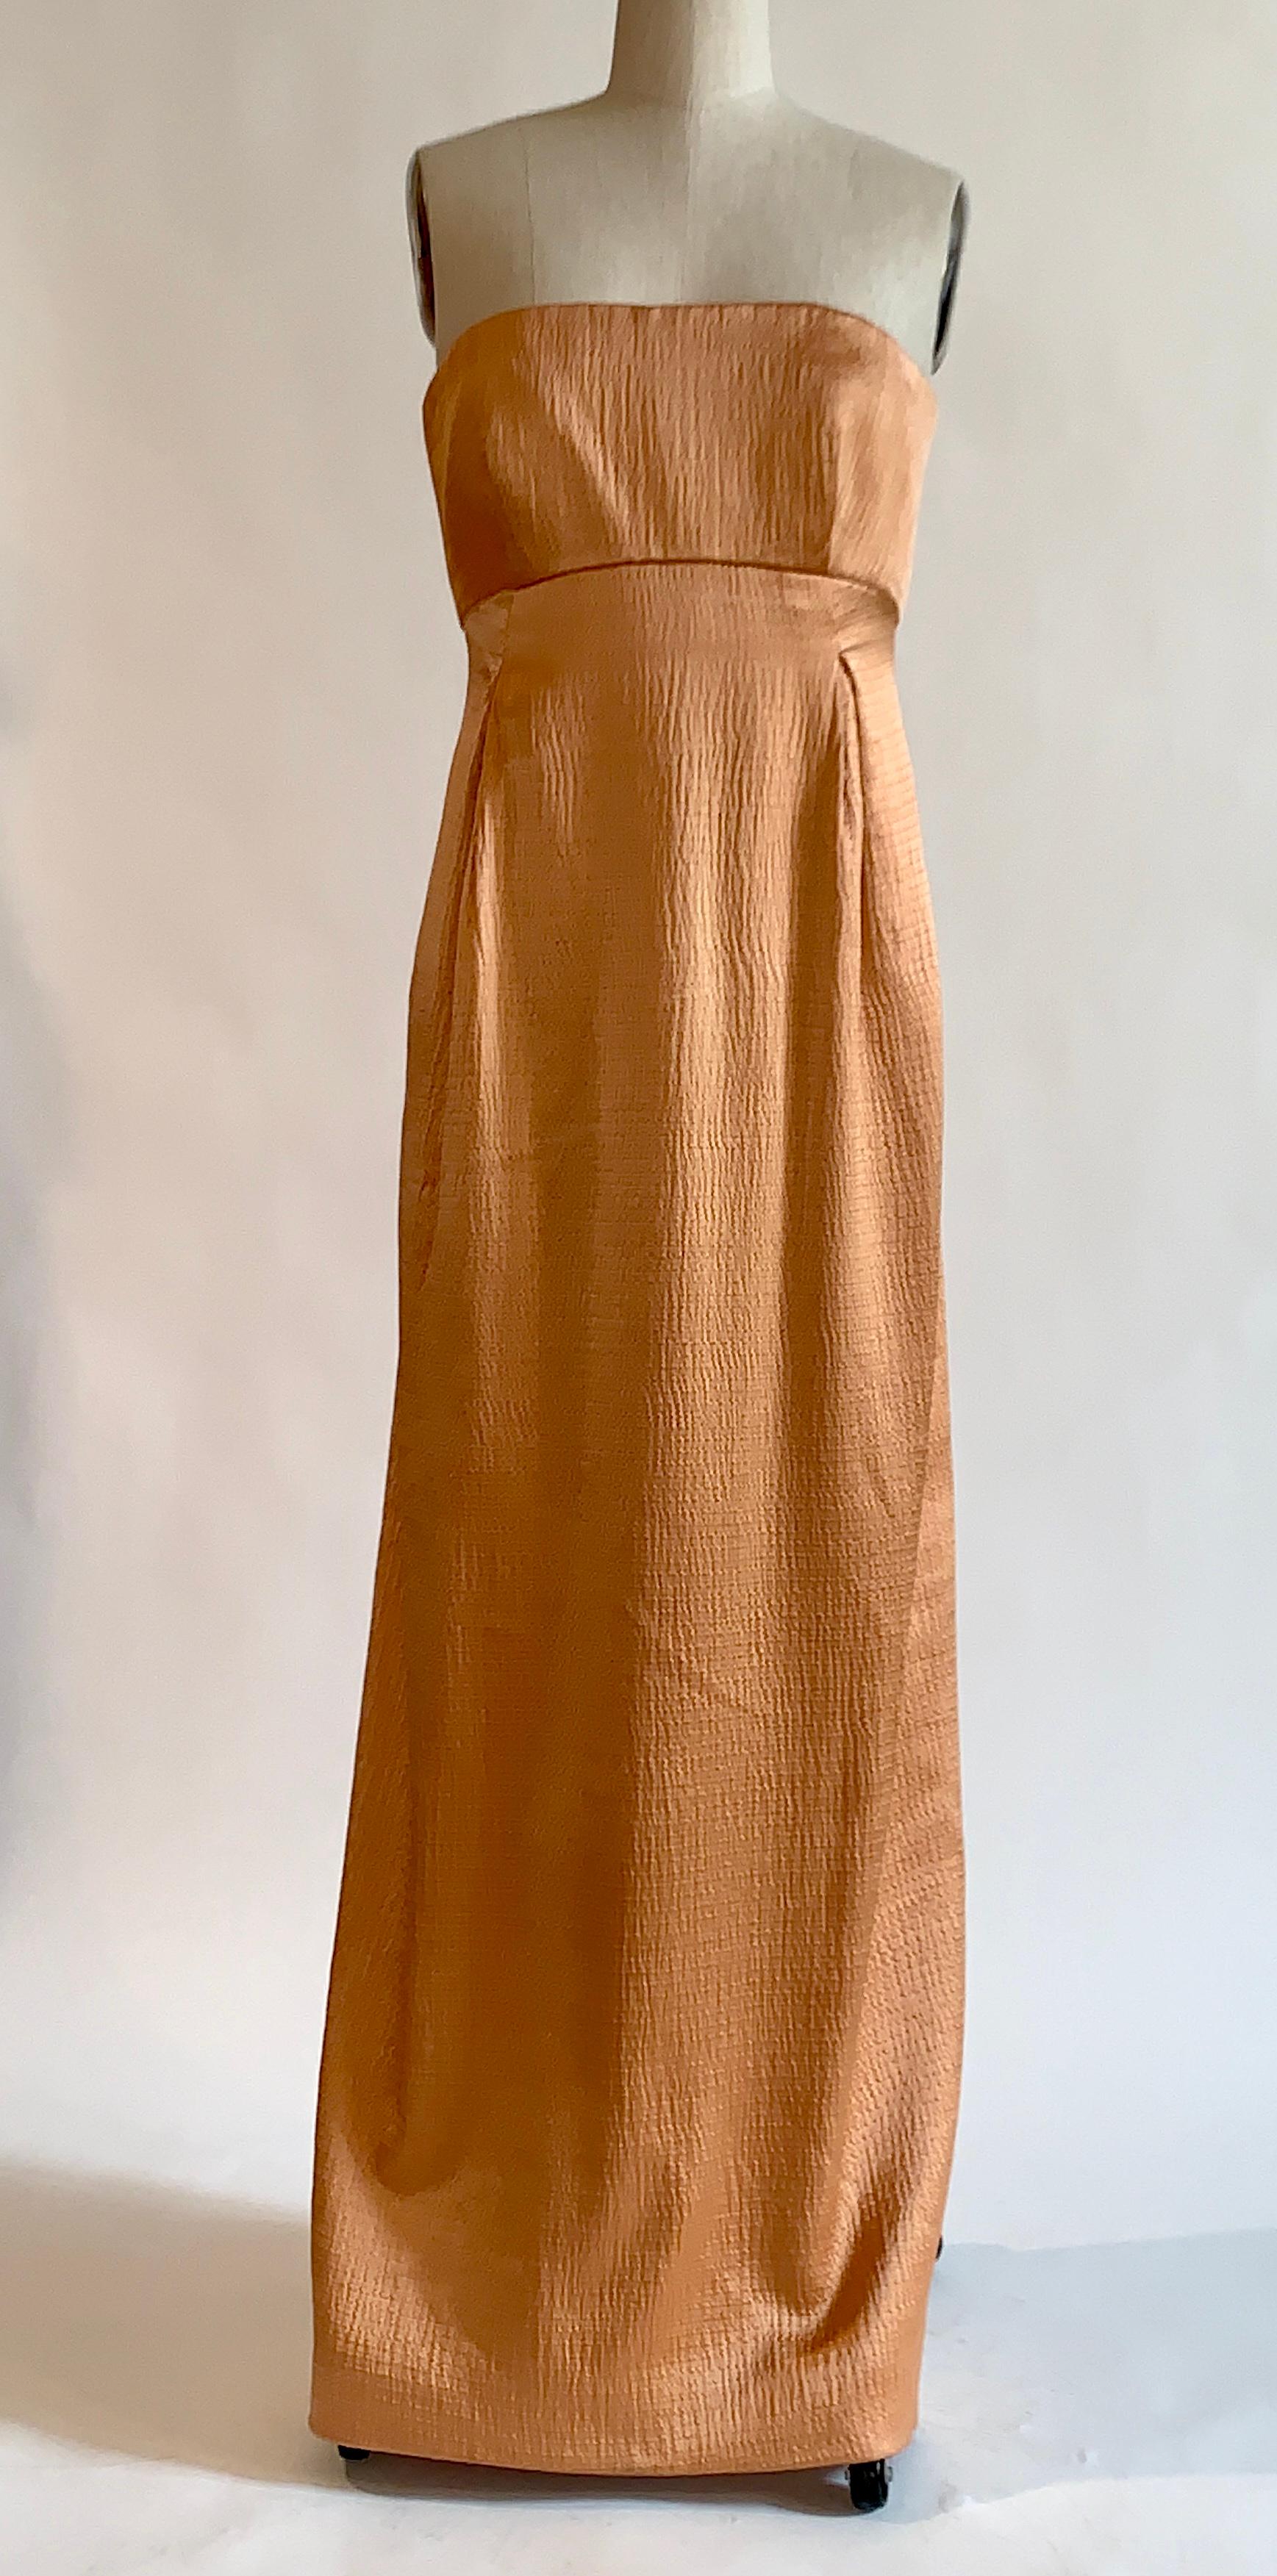 Geoffrey Beene textured silk strapless empire waist long evening dress. Amazing warm apricot color, and beautiful texturing of the silk. Back center slit. Built in boned structuring at top bodice with interior zip, closes with a center back zip and